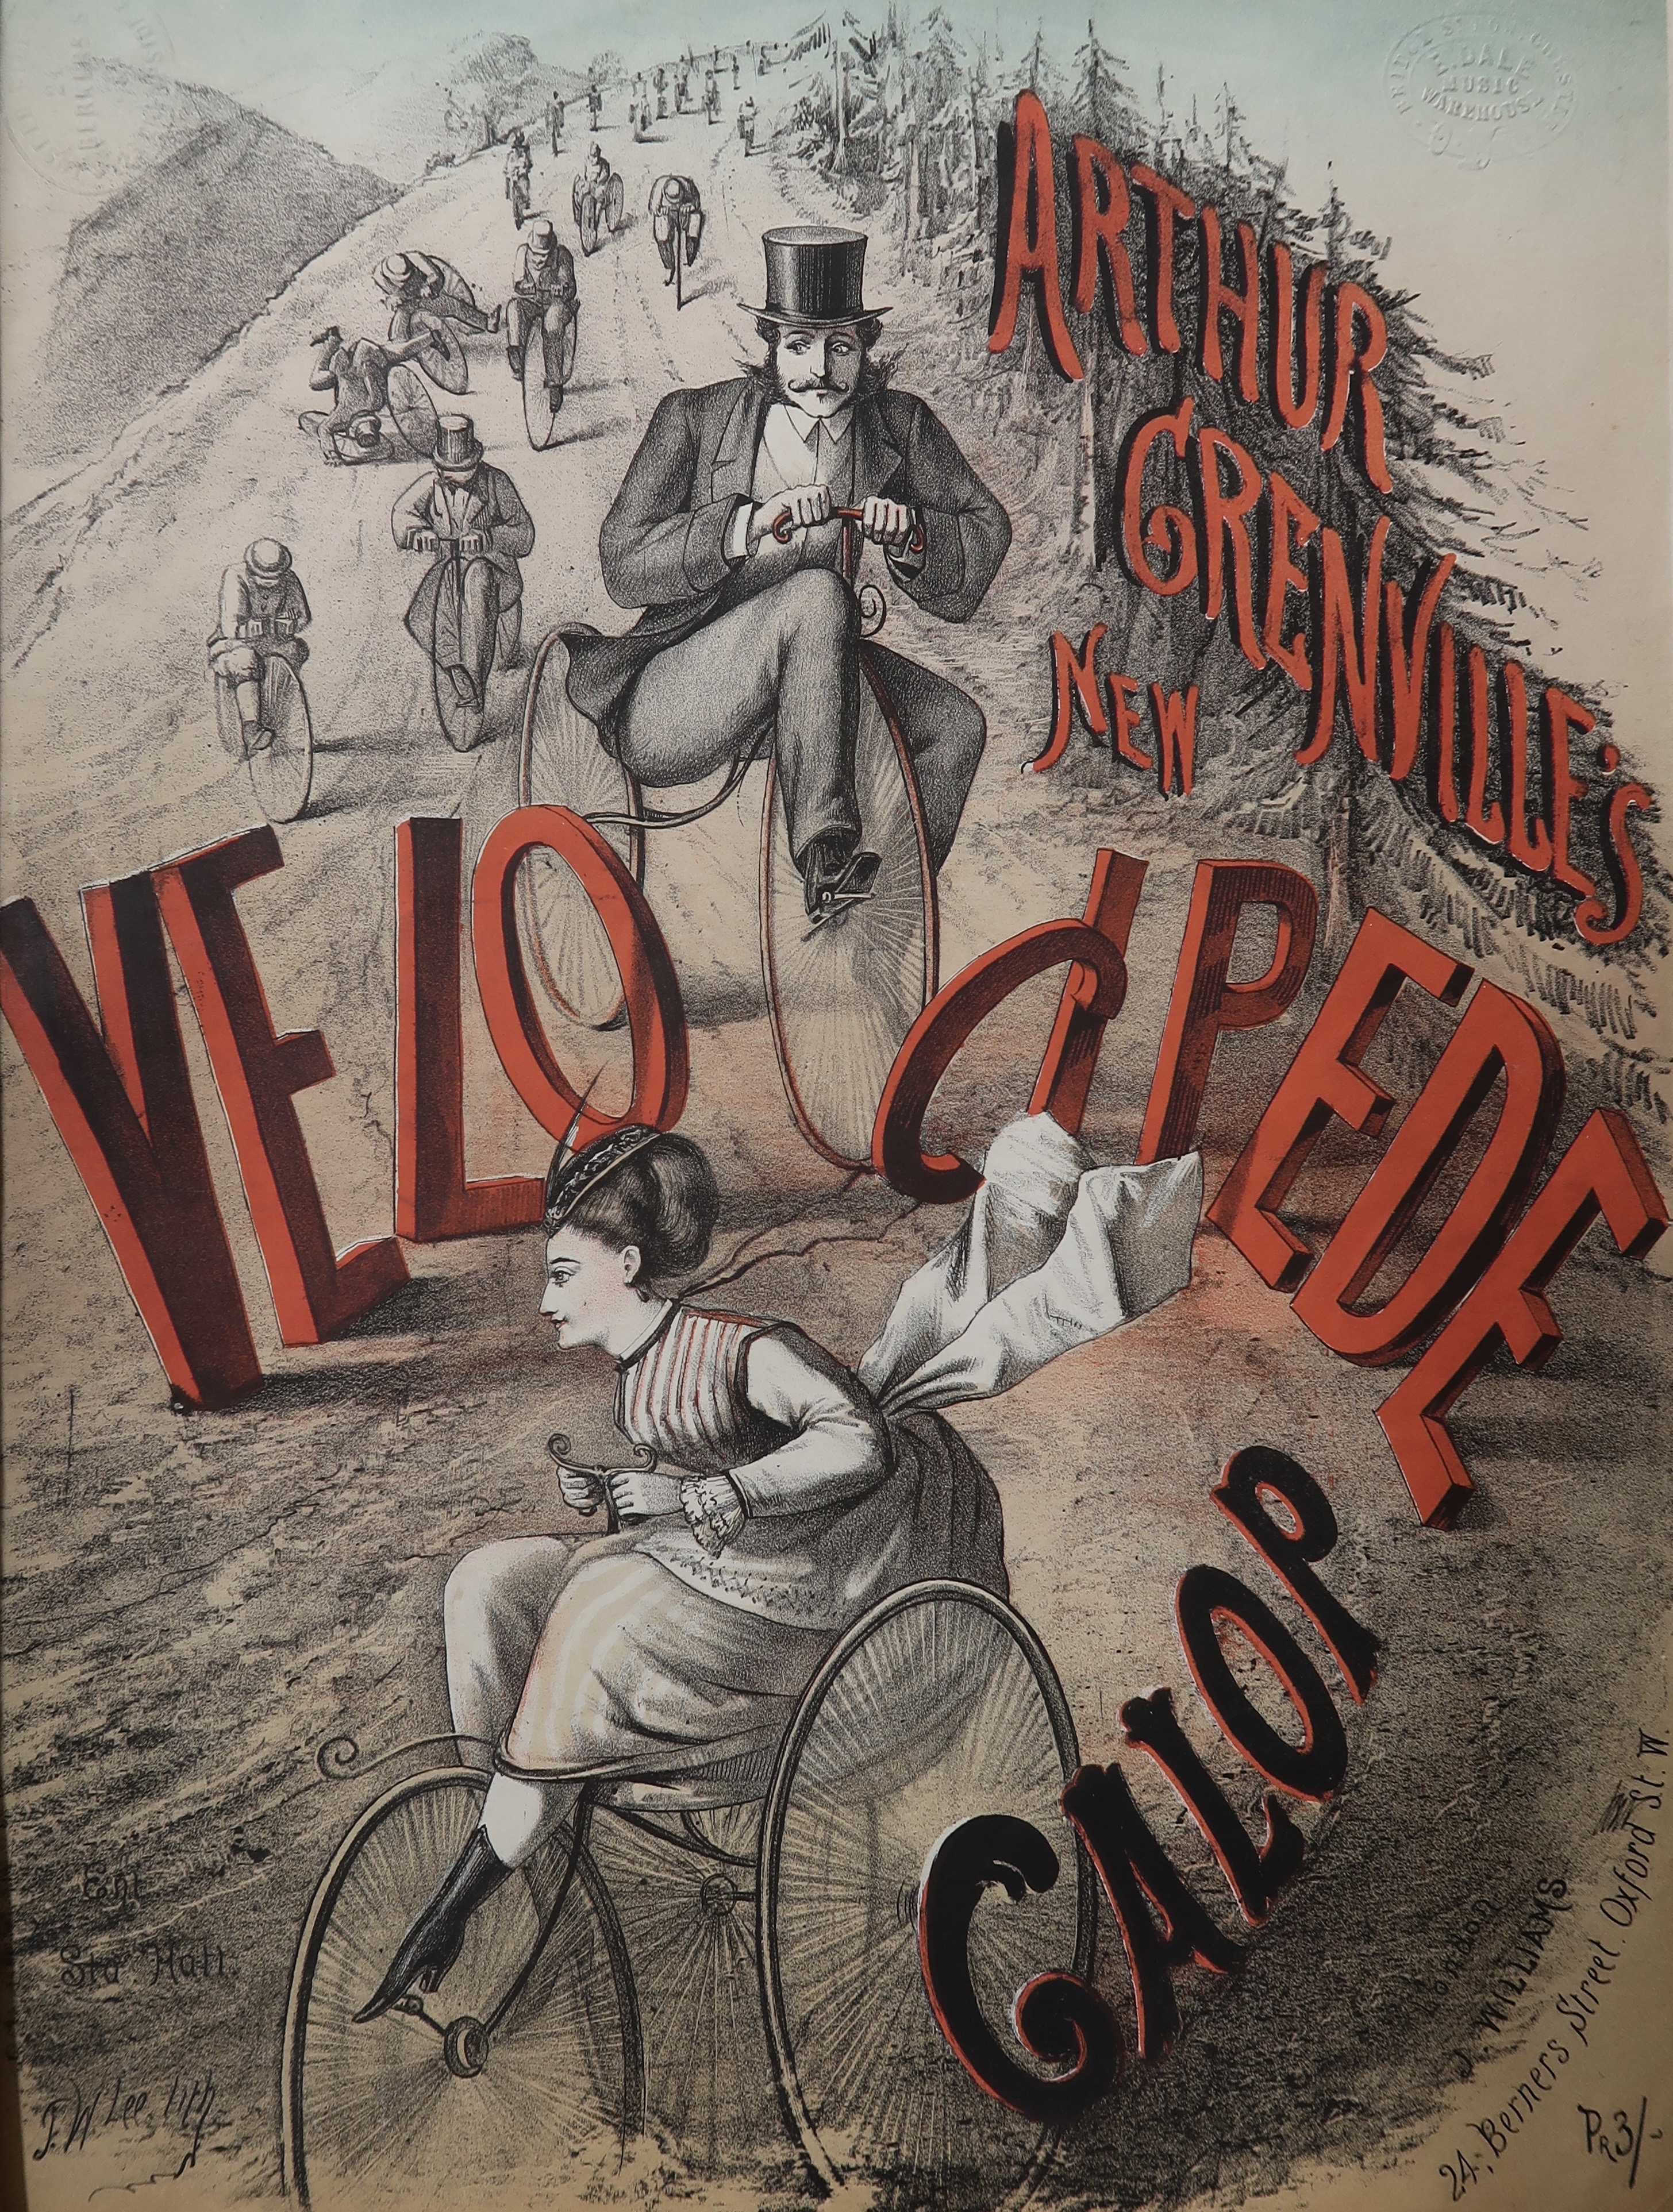 Title page for The New Velocipede Galop by Arthur Grenville, Erddig J-5-3 (19). 